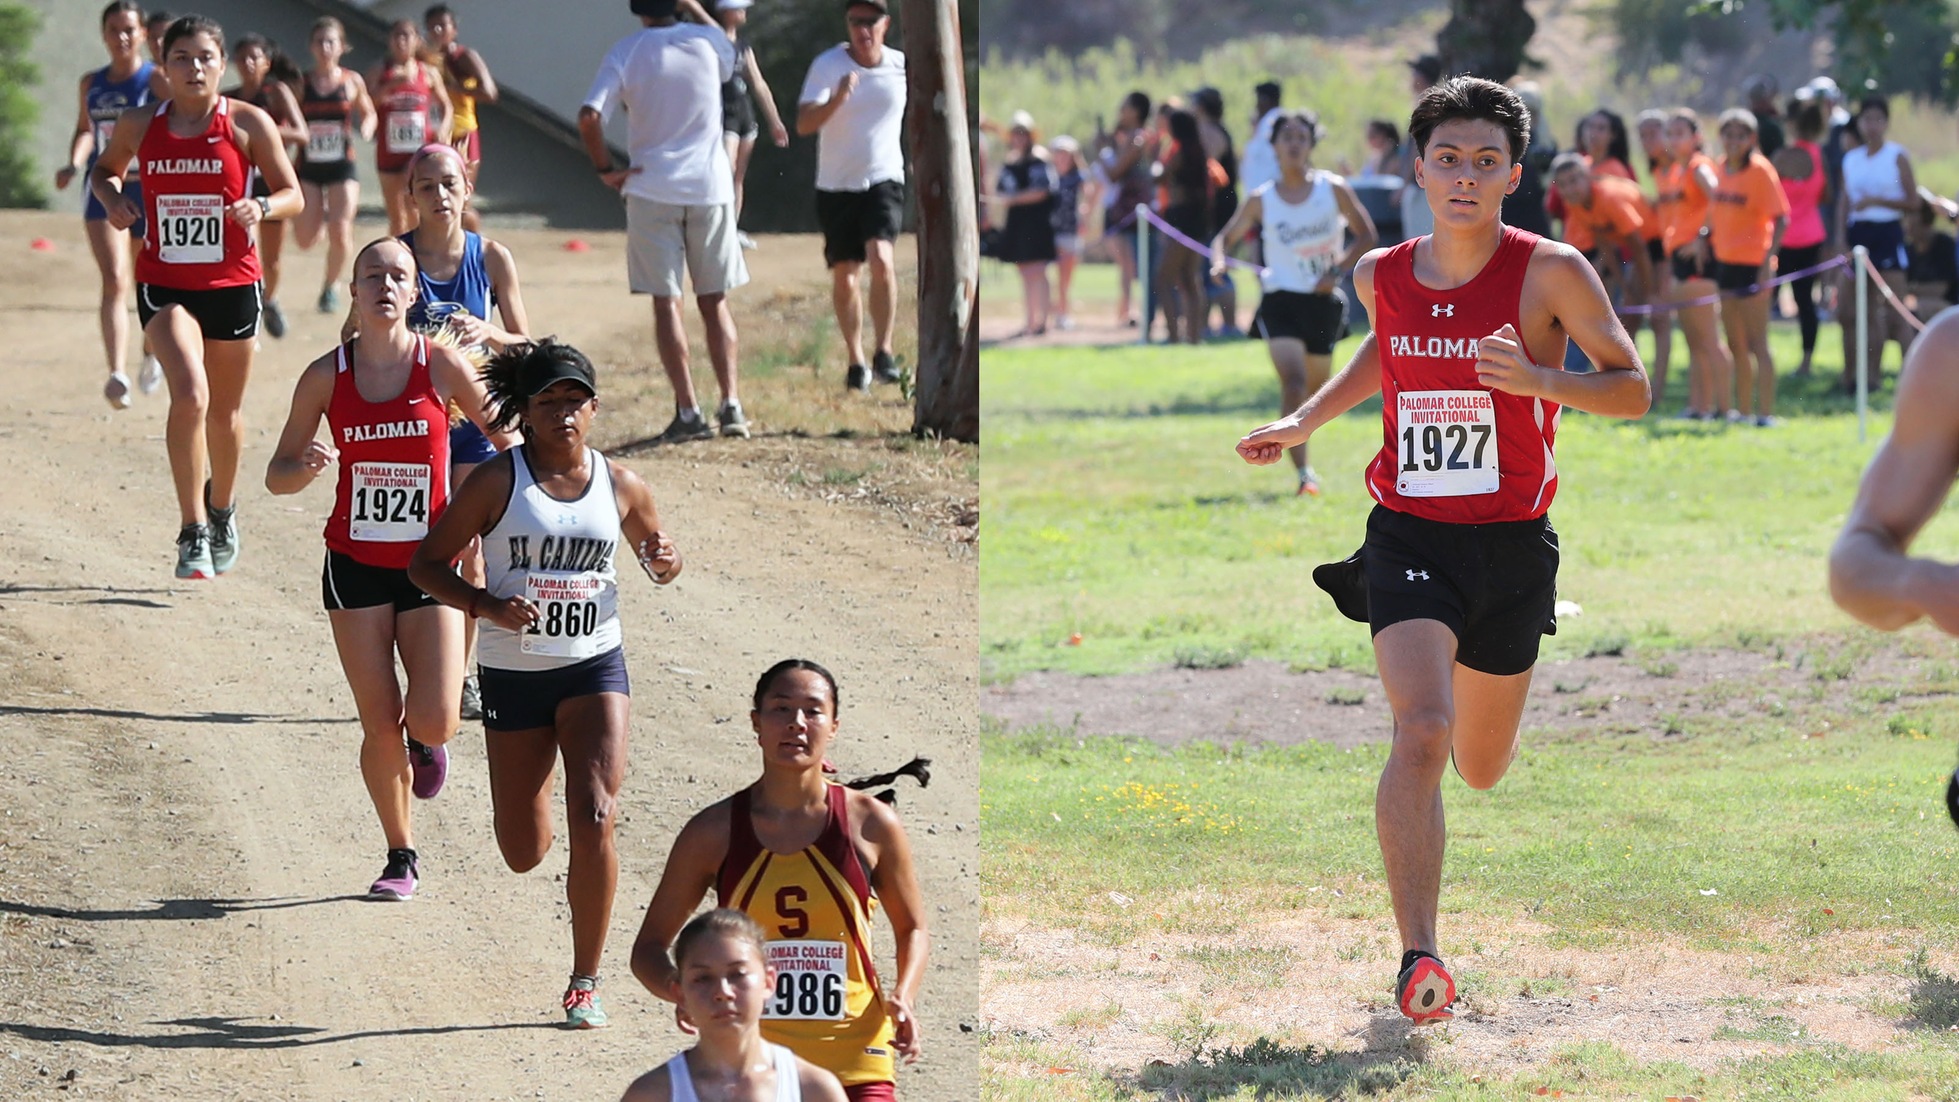 Addison Rose and Miguel Velasquez Campos were Palomar's top finishers. Photos by Hugh Cox.